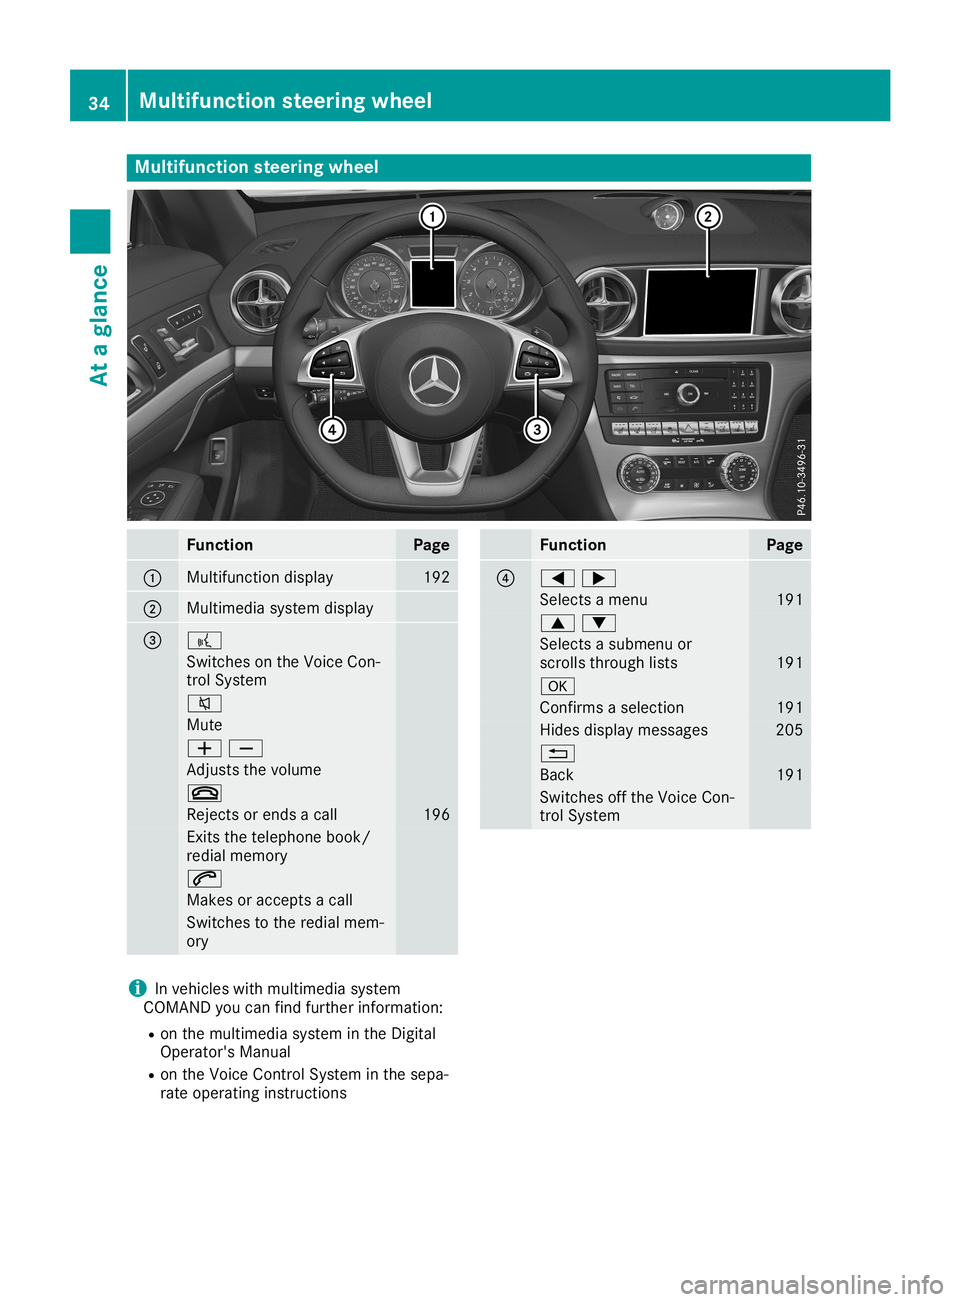 MERCEDES-BENZ SL ROADSTER 2019  Owners Manual Multifunc
tionsteering wheel Func
tion Page
0043
Mul
tifunction display 192
0044
Mul
timedi asystem display 0087 0059
Switches
onthe Voice Con-
trol System 0063
Mute
00810082
Adju
ststhe volum e 0076
